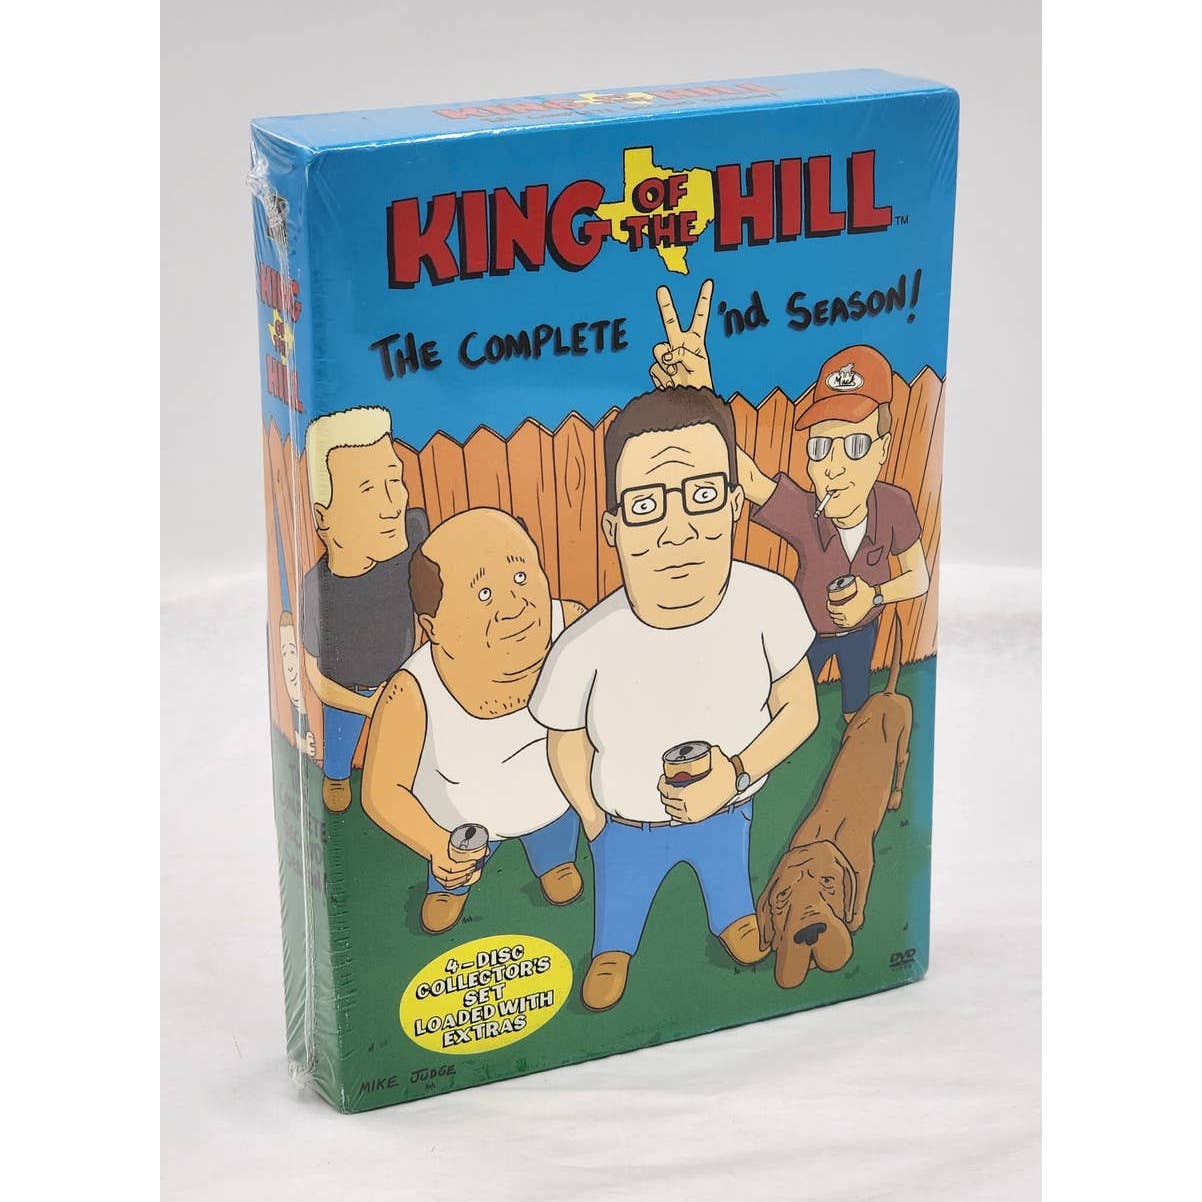 King of the Hill: The Complete 4th Season (DVD, 1999) for sale online